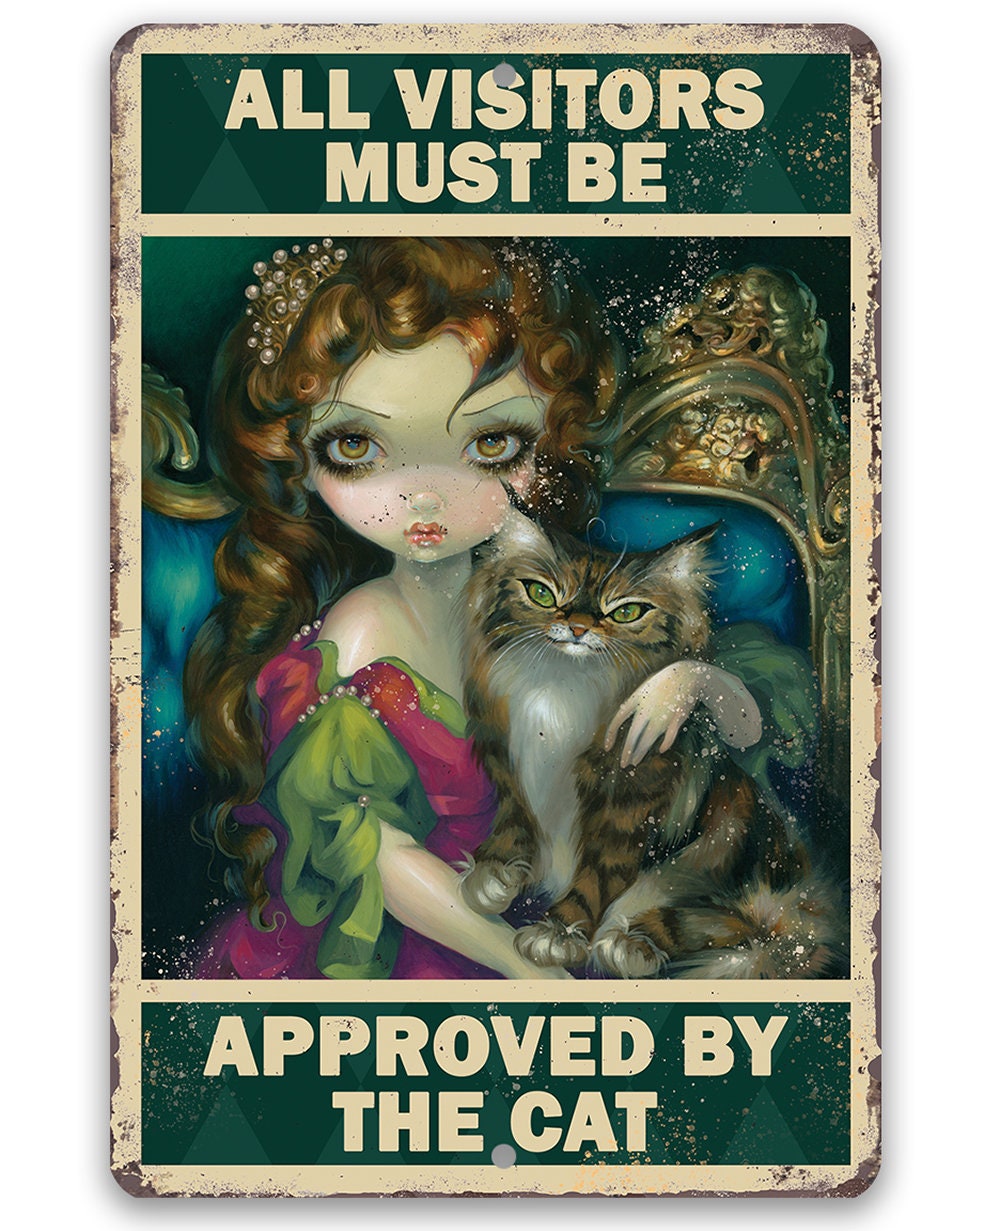 All Visitors Must Be Approved By The Cat - Metal Sign Metal Sign Lone Star Art 